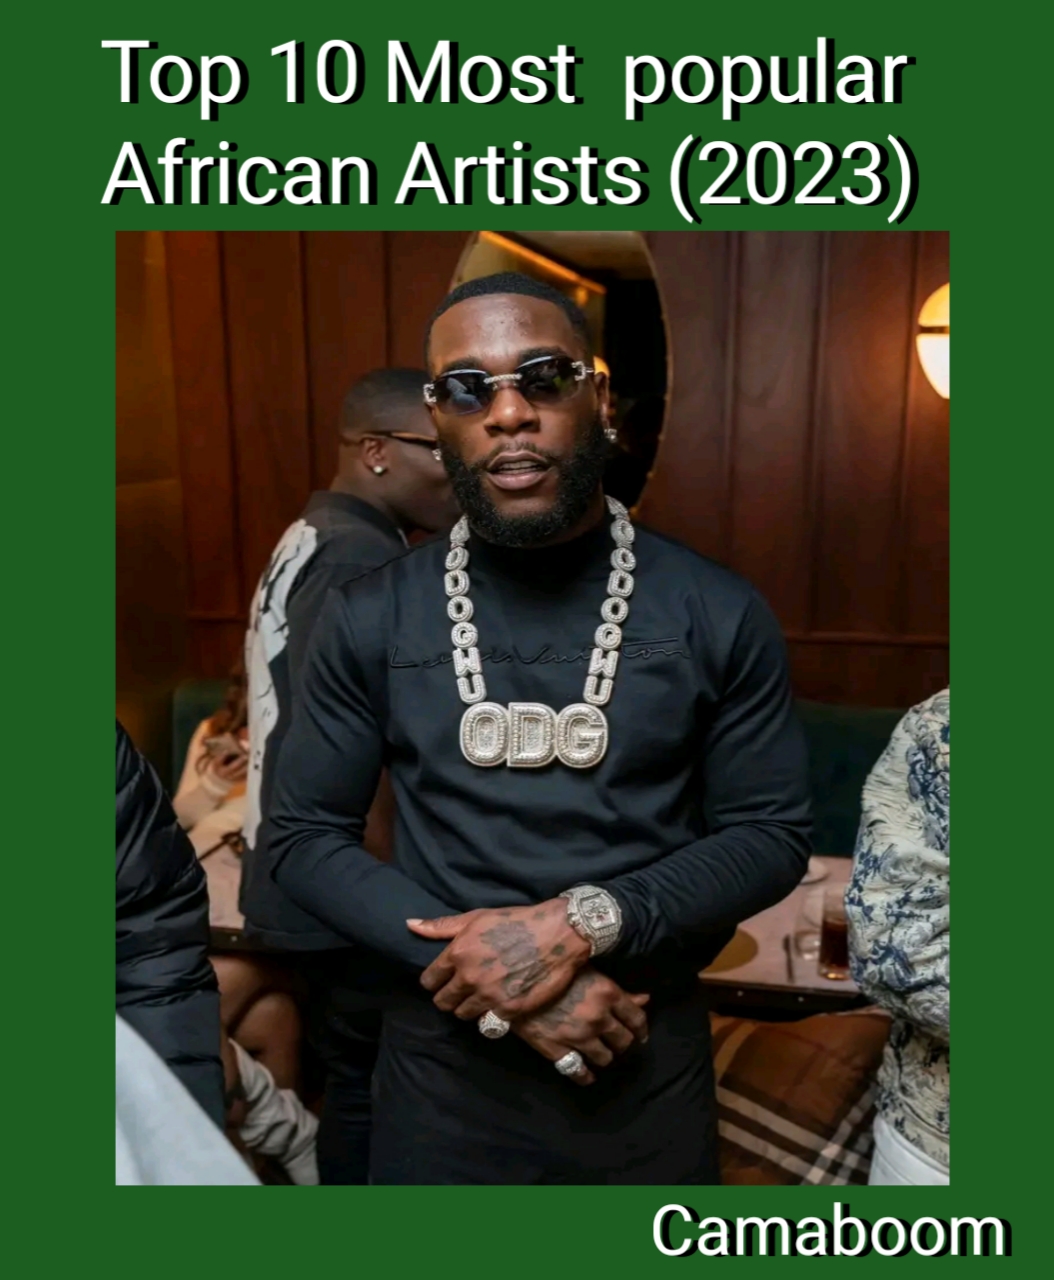 Top 10 most popular African Artists (2023)
